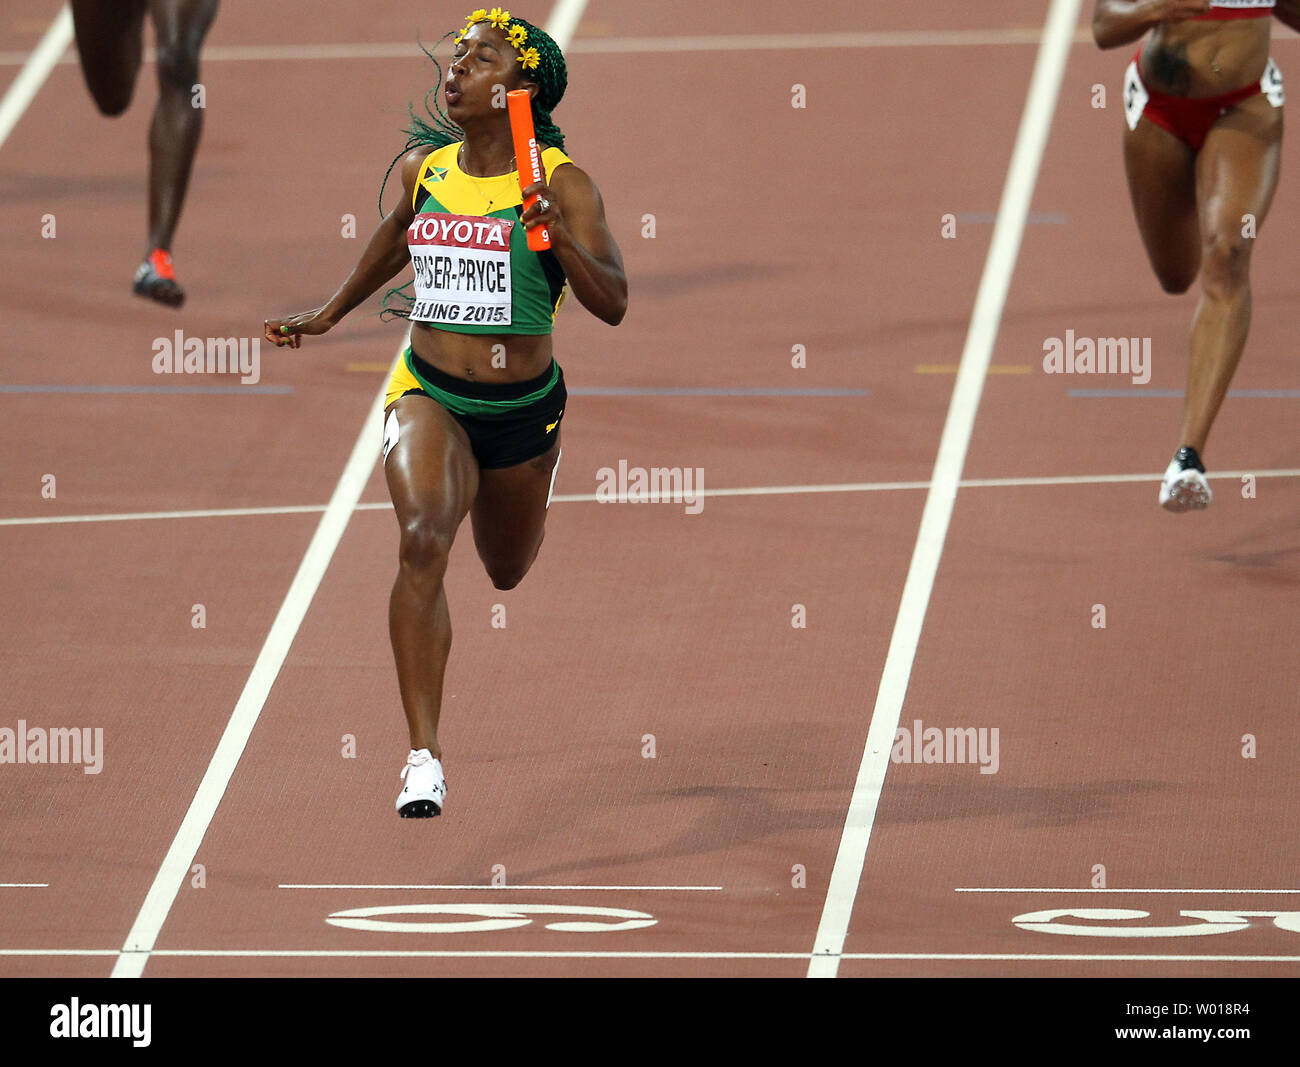 Jamaica's Shelly-Ann Fraser-Pryce wins the final leg of the 4x100 meters women's relay final at the IAAF World Championships being hosted by Beijing on August 29, 2015.  Jamaica won with a time of 41.07 seconds, followed by USA (41.68) and Trinidad and Tobago (42.03) in third.     Photo by Stephen Shaver/UPI Stock Photo